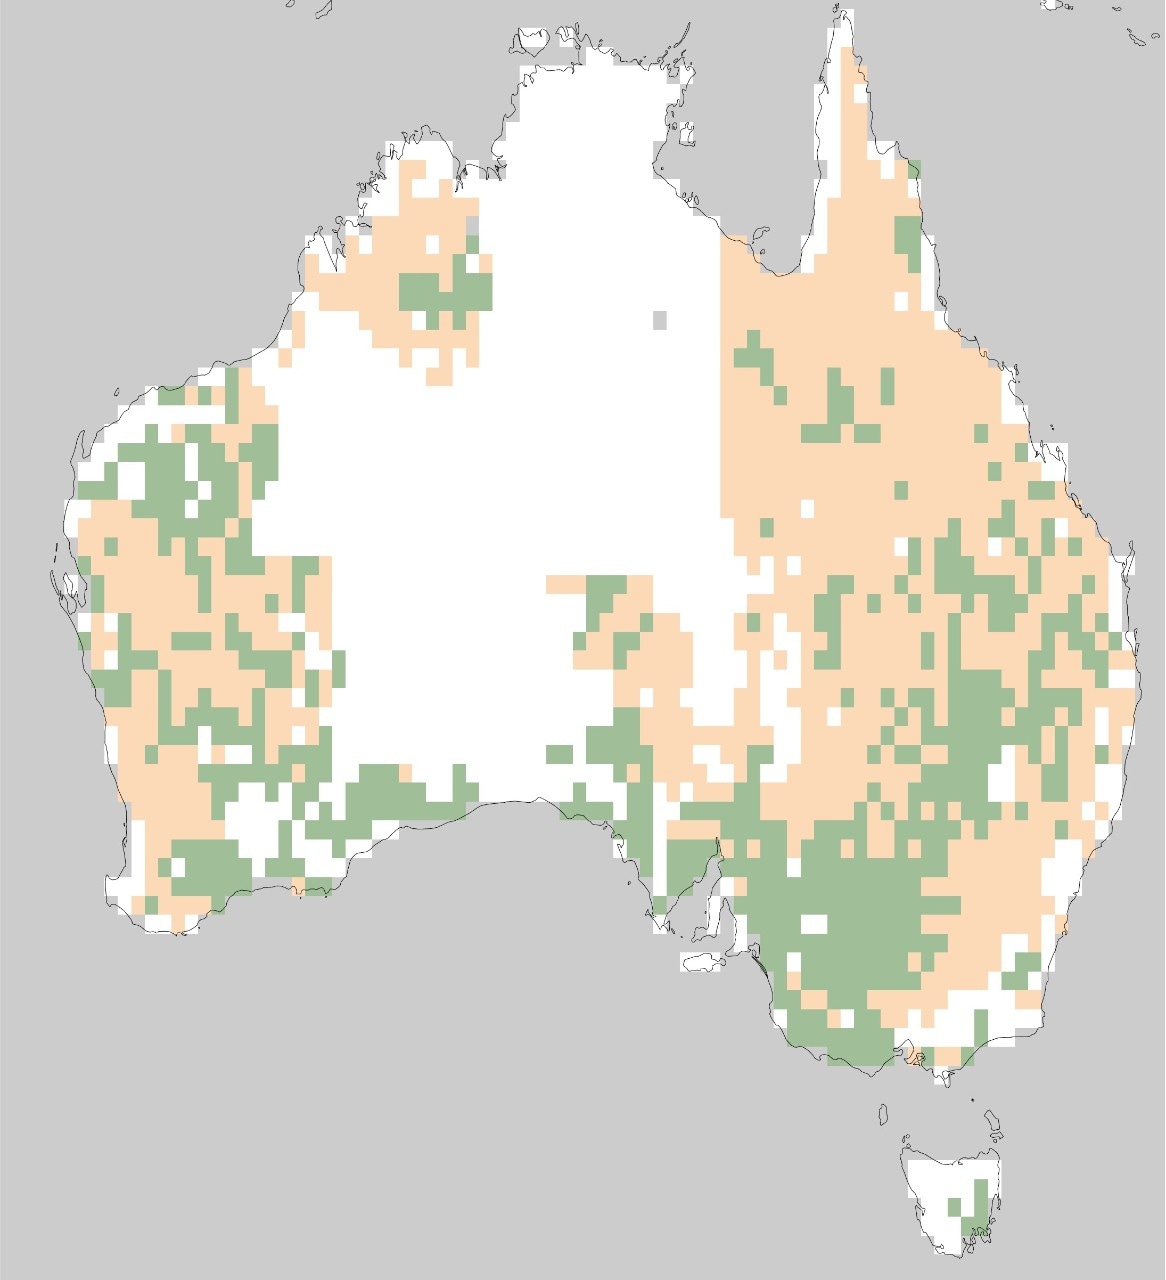 A portion of the map showing distribution of glyphosate in Australia.